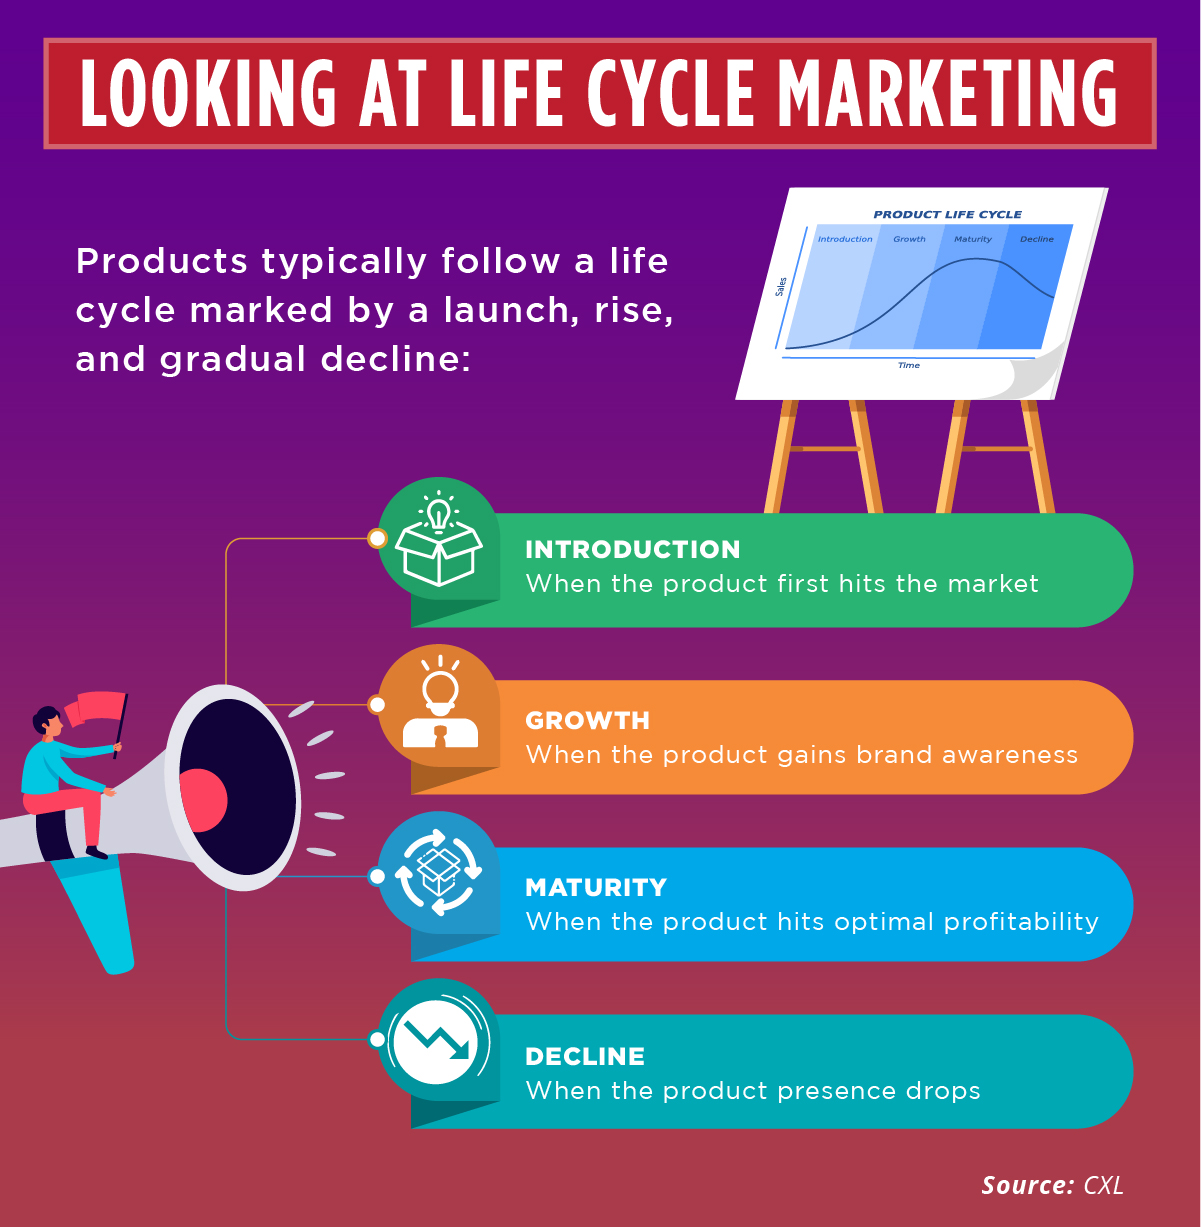 The lifecycle of marketing includes Introduction, Growth, Maturity, and Decline.